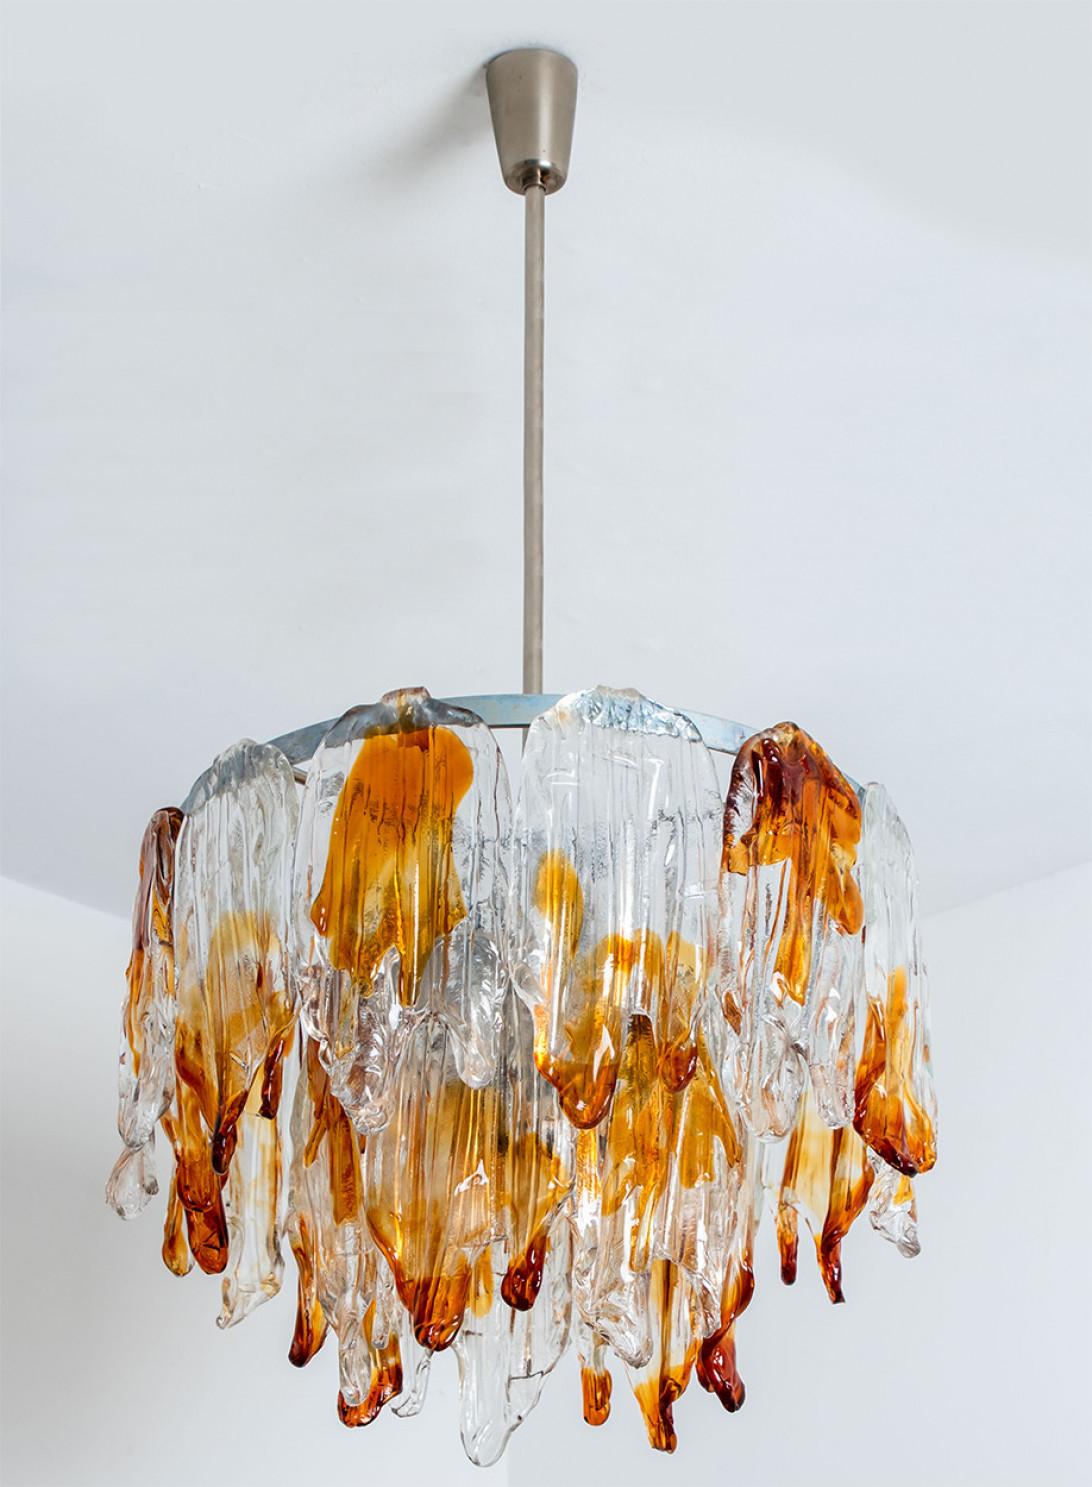 This elegant Murano glass chandelier is designed and manufactured by Mazzega, Italy in the 1960s.
The chandelier has a Chrome rod, hanging from the ceiling with orange and clear glass shades, resembling hanging leaves.
The chandelier illuminates